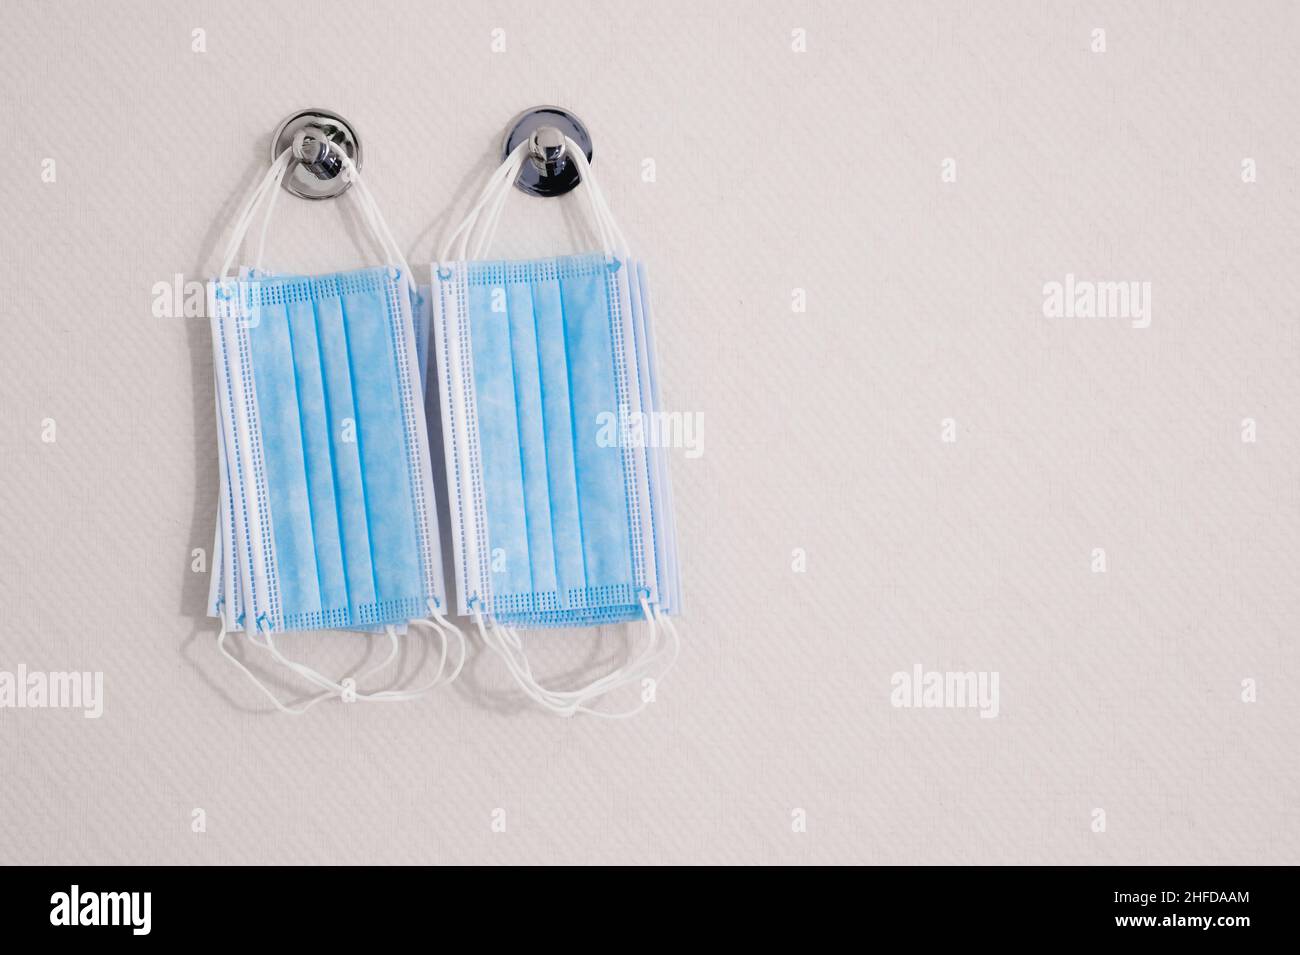 Blue face masks hanging on the white wall background. Concept of coronavirus pandemic. Copy space for the text. Stock Photo